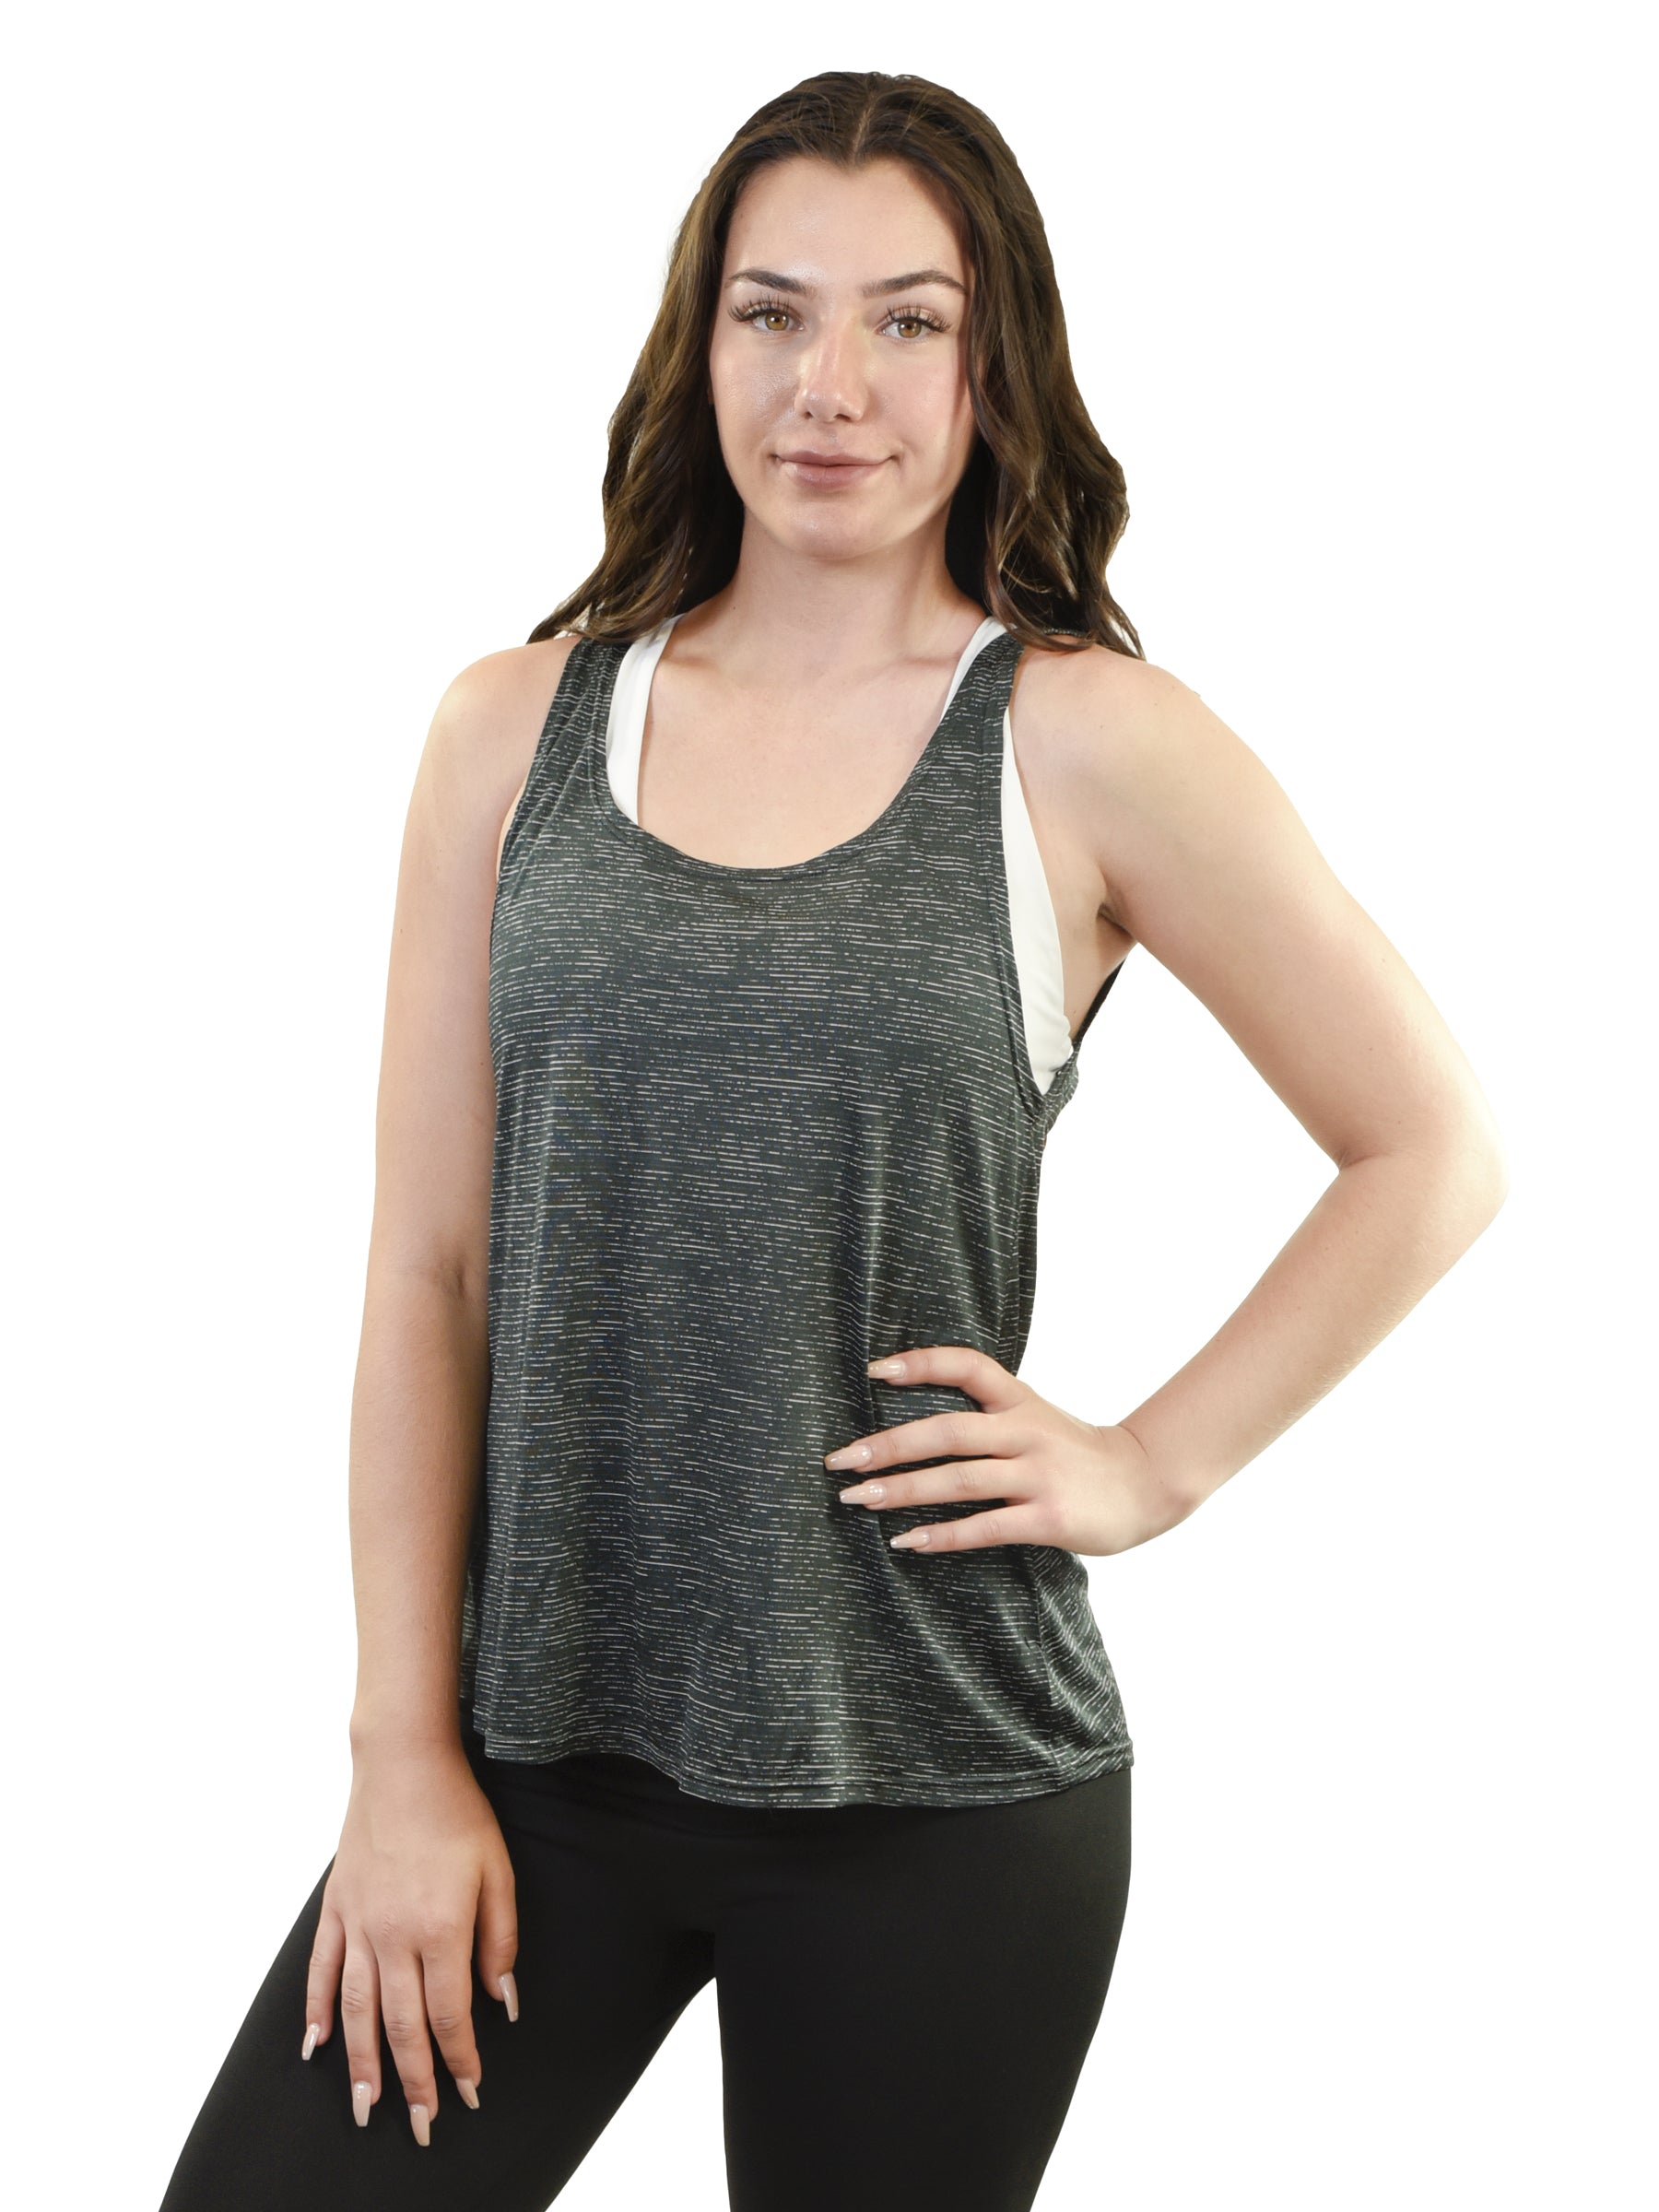 Model wearing Young USA Ladies Athletic Tank Top Front - Black